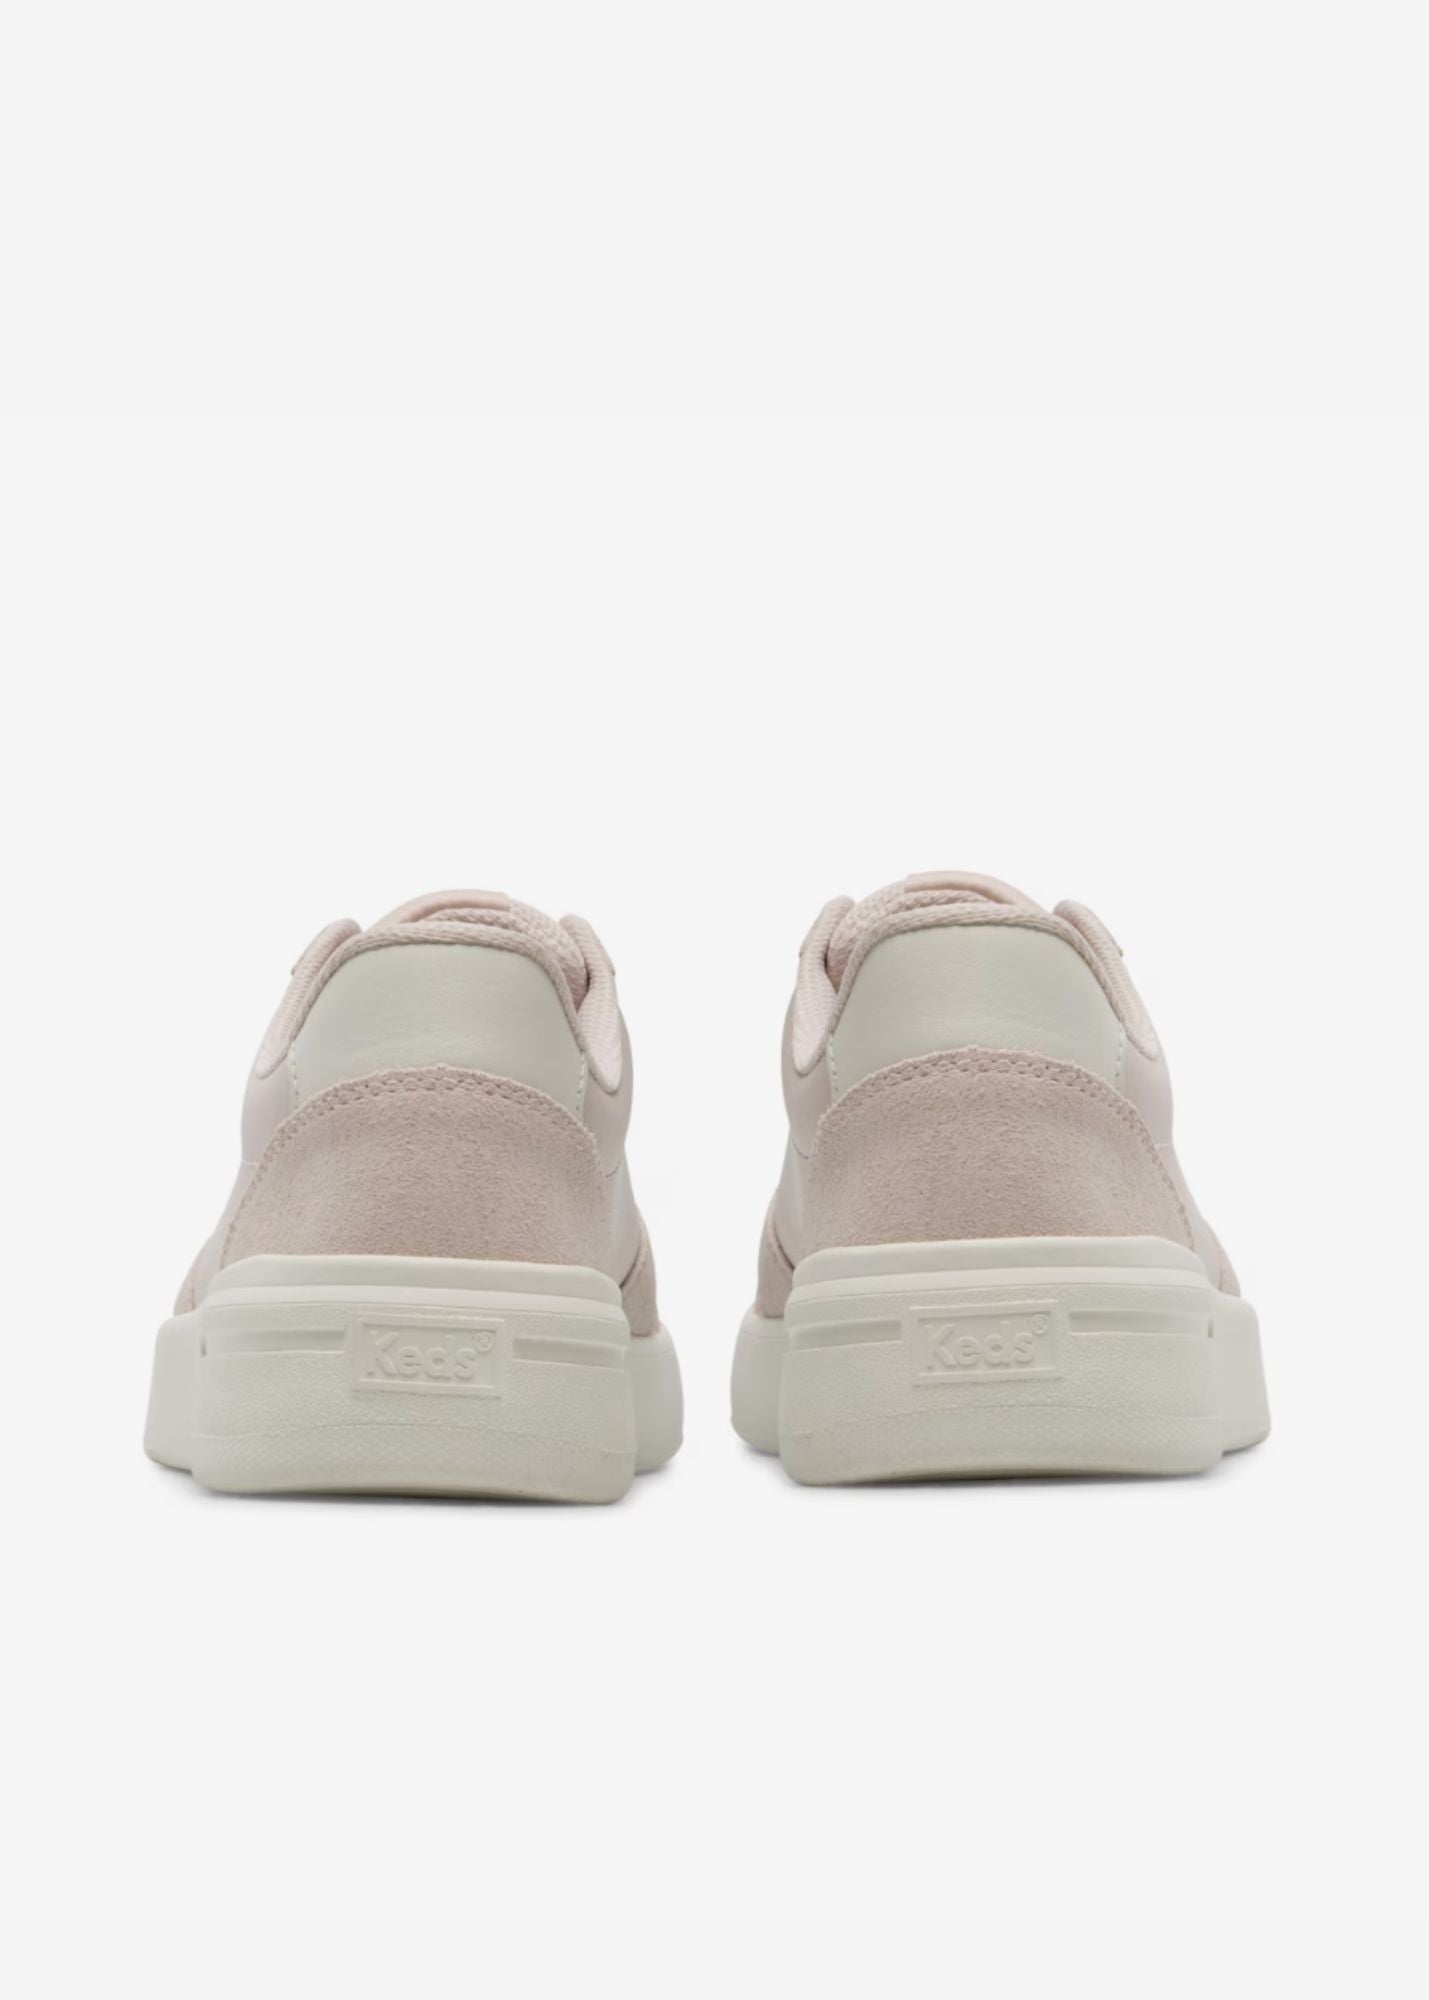 Keds® The Court Suede Sneaker - FINAL SALE Shoes